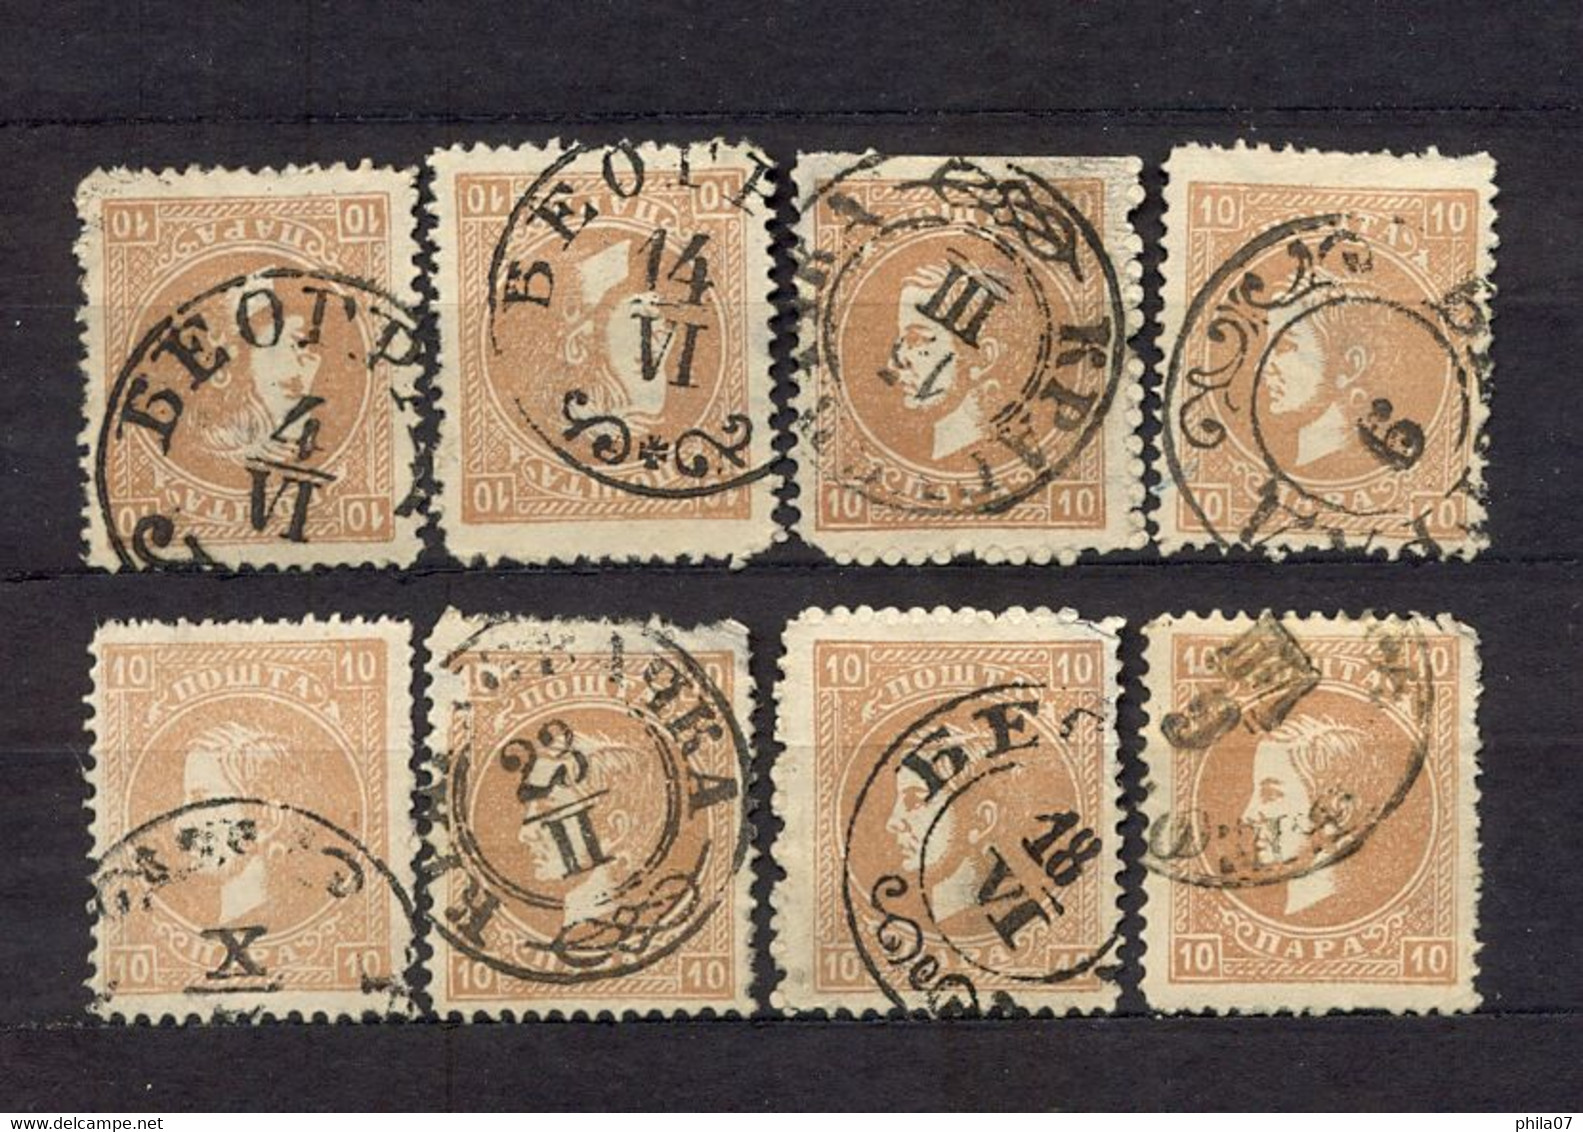 SERBIA - Lot Of Stamps 10 Para With Nice Cancels. - Serbia